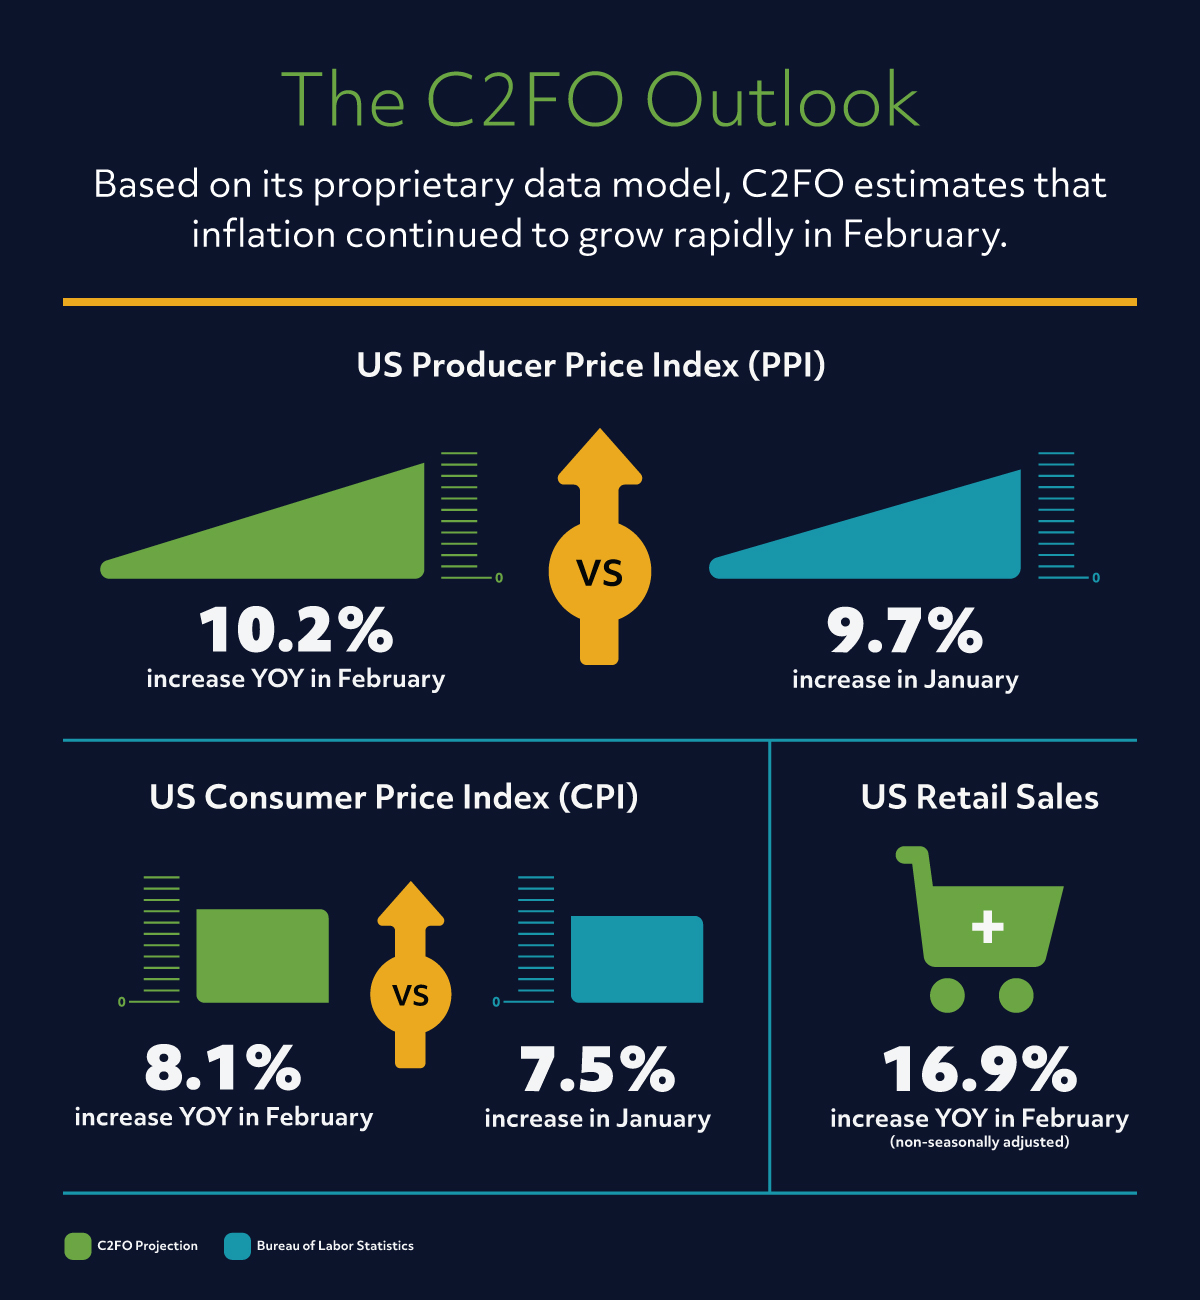 The C2FO Outlook  Based on its proprietary data model, C2FO estimates that inflation continued to grow rapidly in February.  U.S. Producer Price Index (PPI) 10.2% increase YOY in February •	vs. 9.7% increase in January   US Consumer Price Index (CPI) 8.1% increase YOY in February •	vs. 7.5% increase in January US Retail Sales 16.9% increase YOY in February (non-seasonally adjusted)